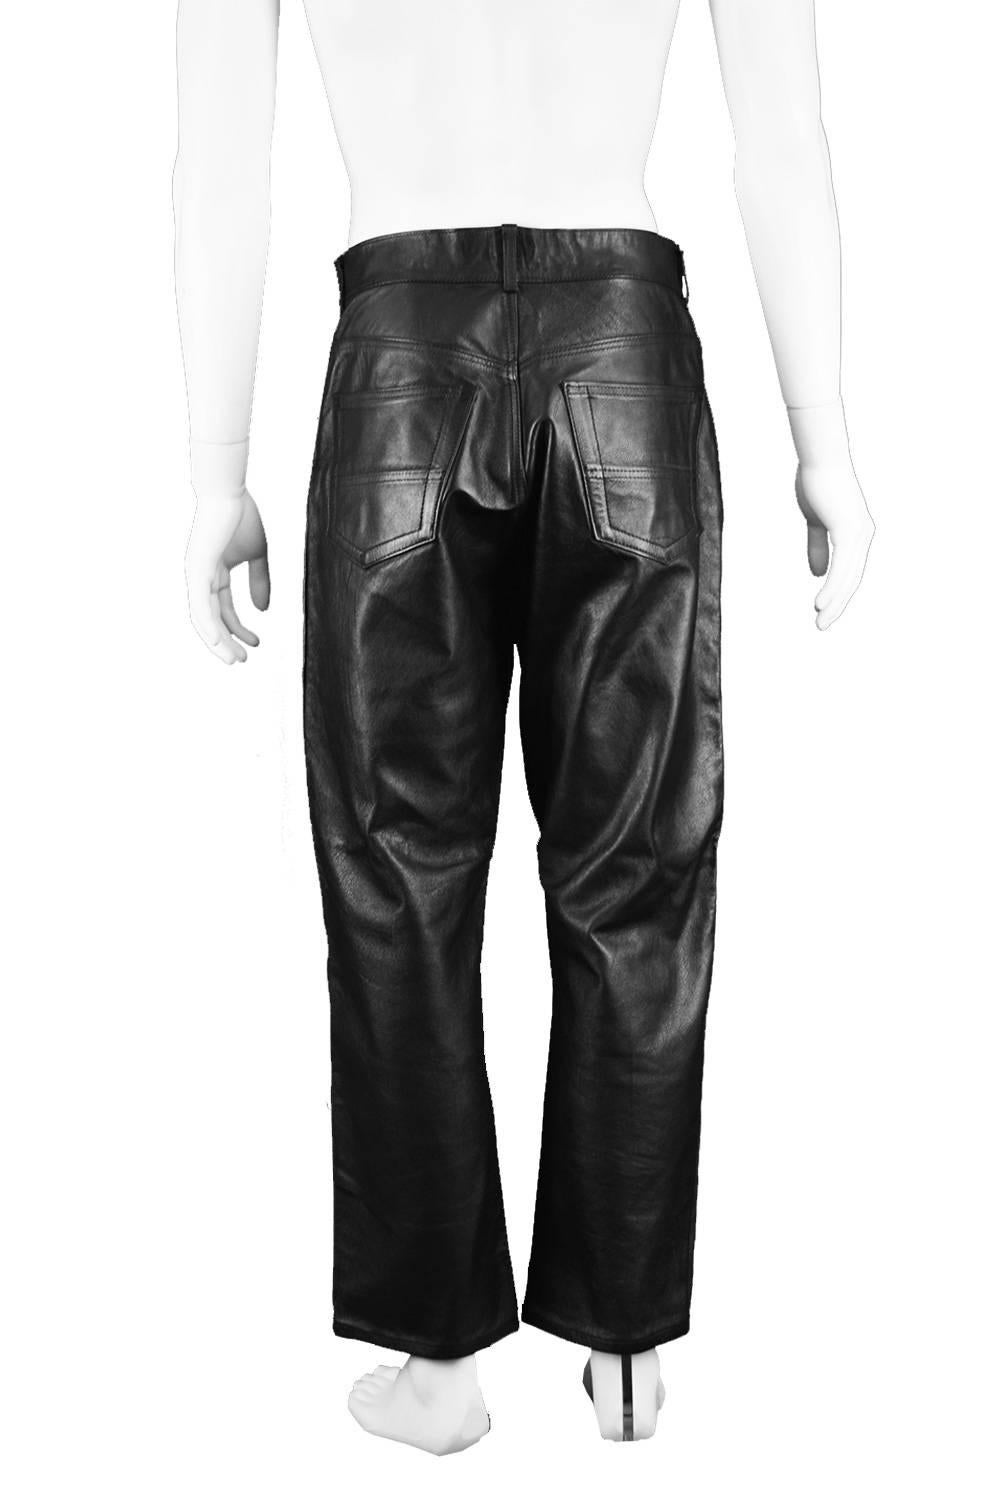 Paul Smith Men's Vintage Black Real Leather Straight Leg Pants, 1990s For Sale 5